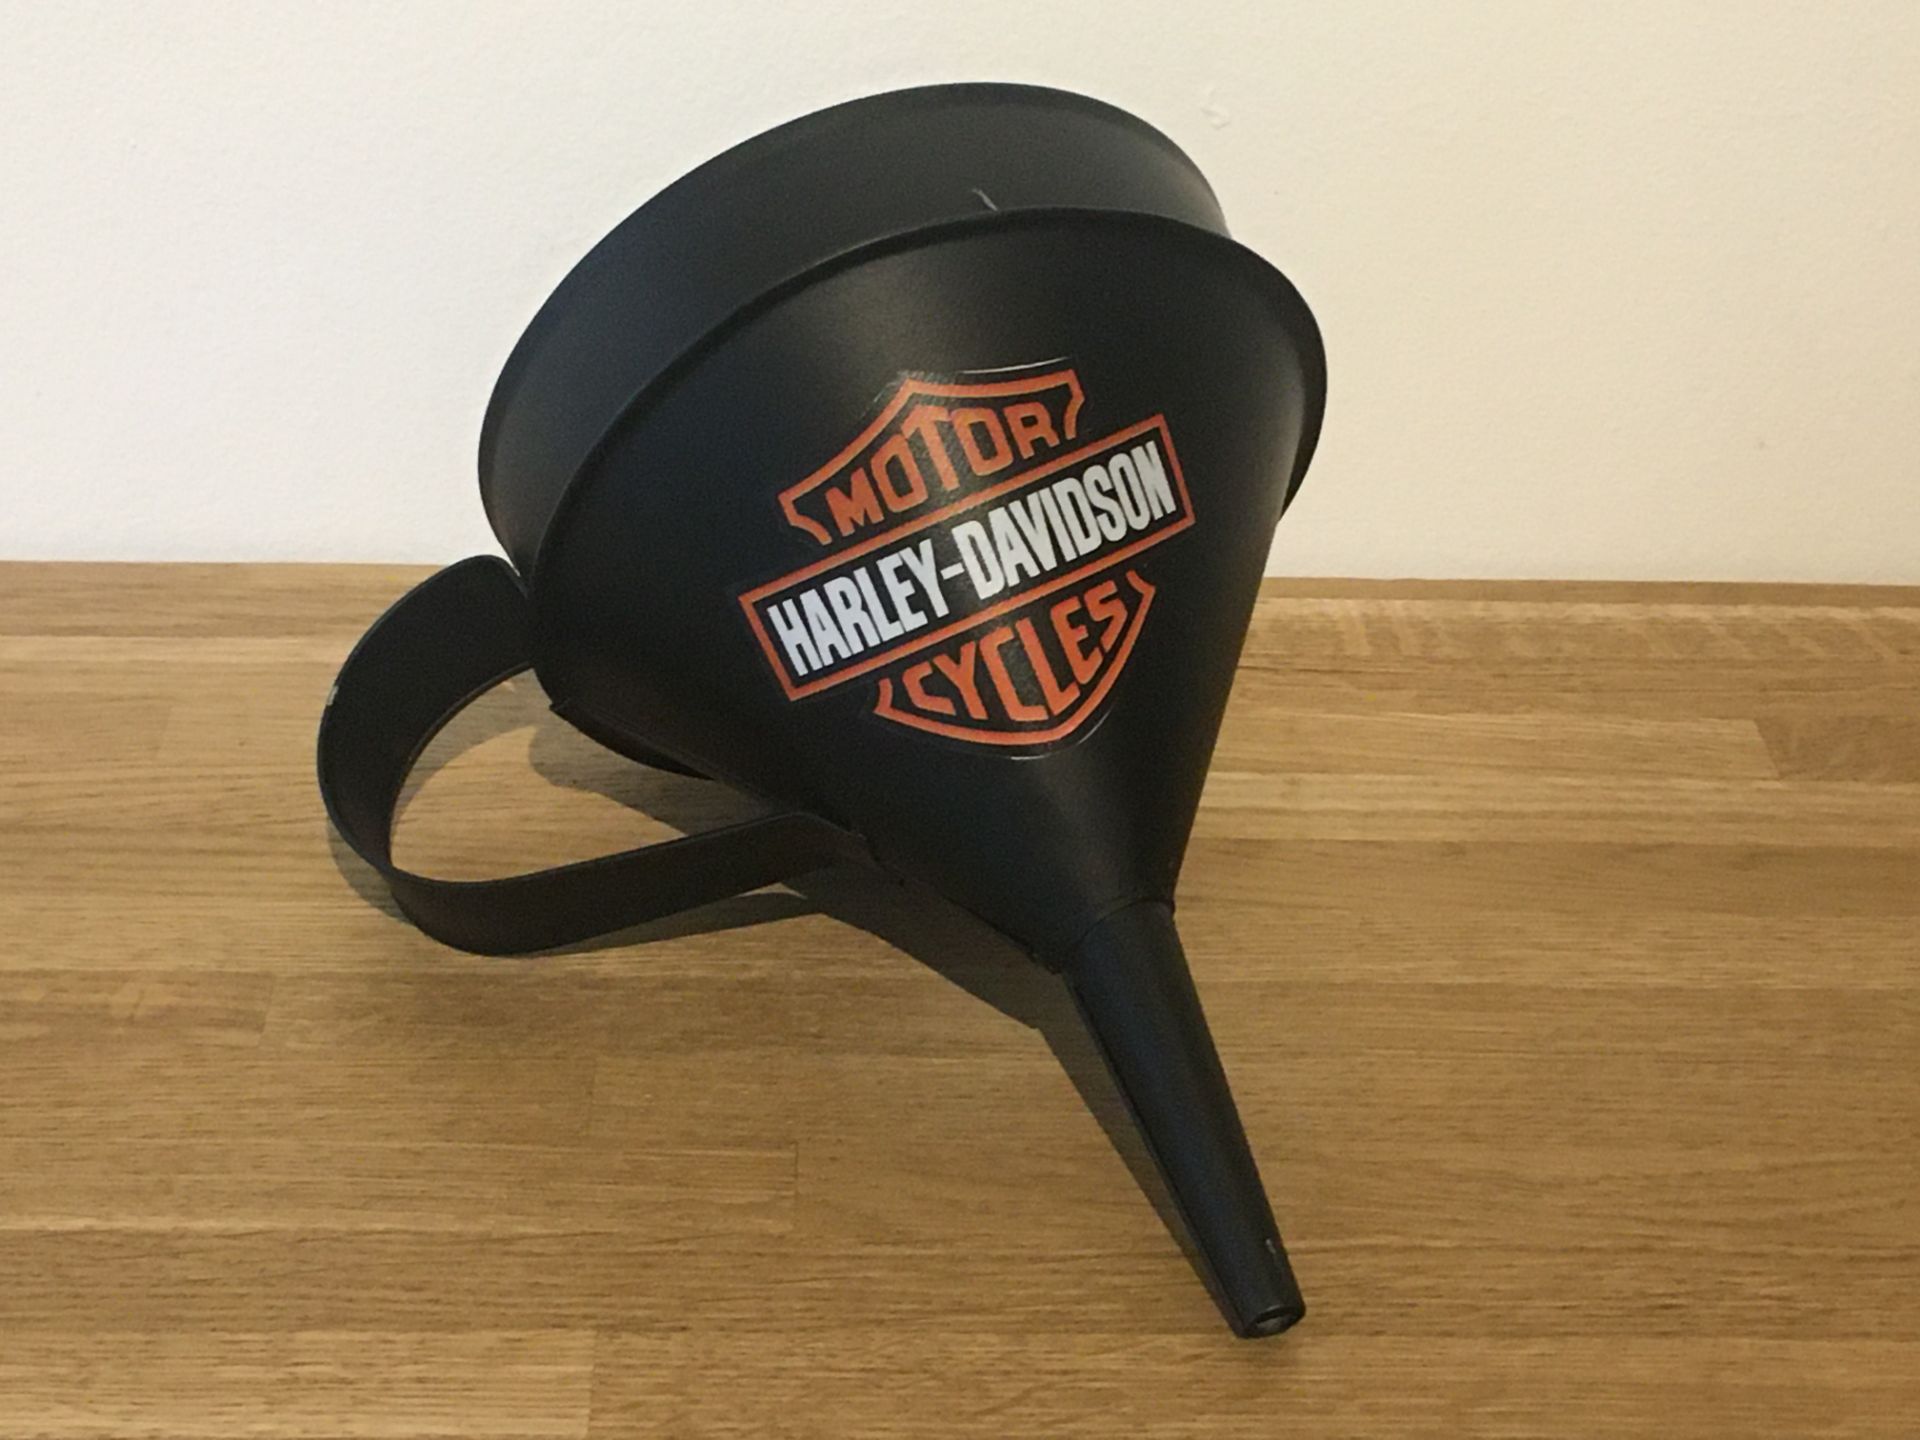 Small Harley Davidson Motorcycles Oil Funnel